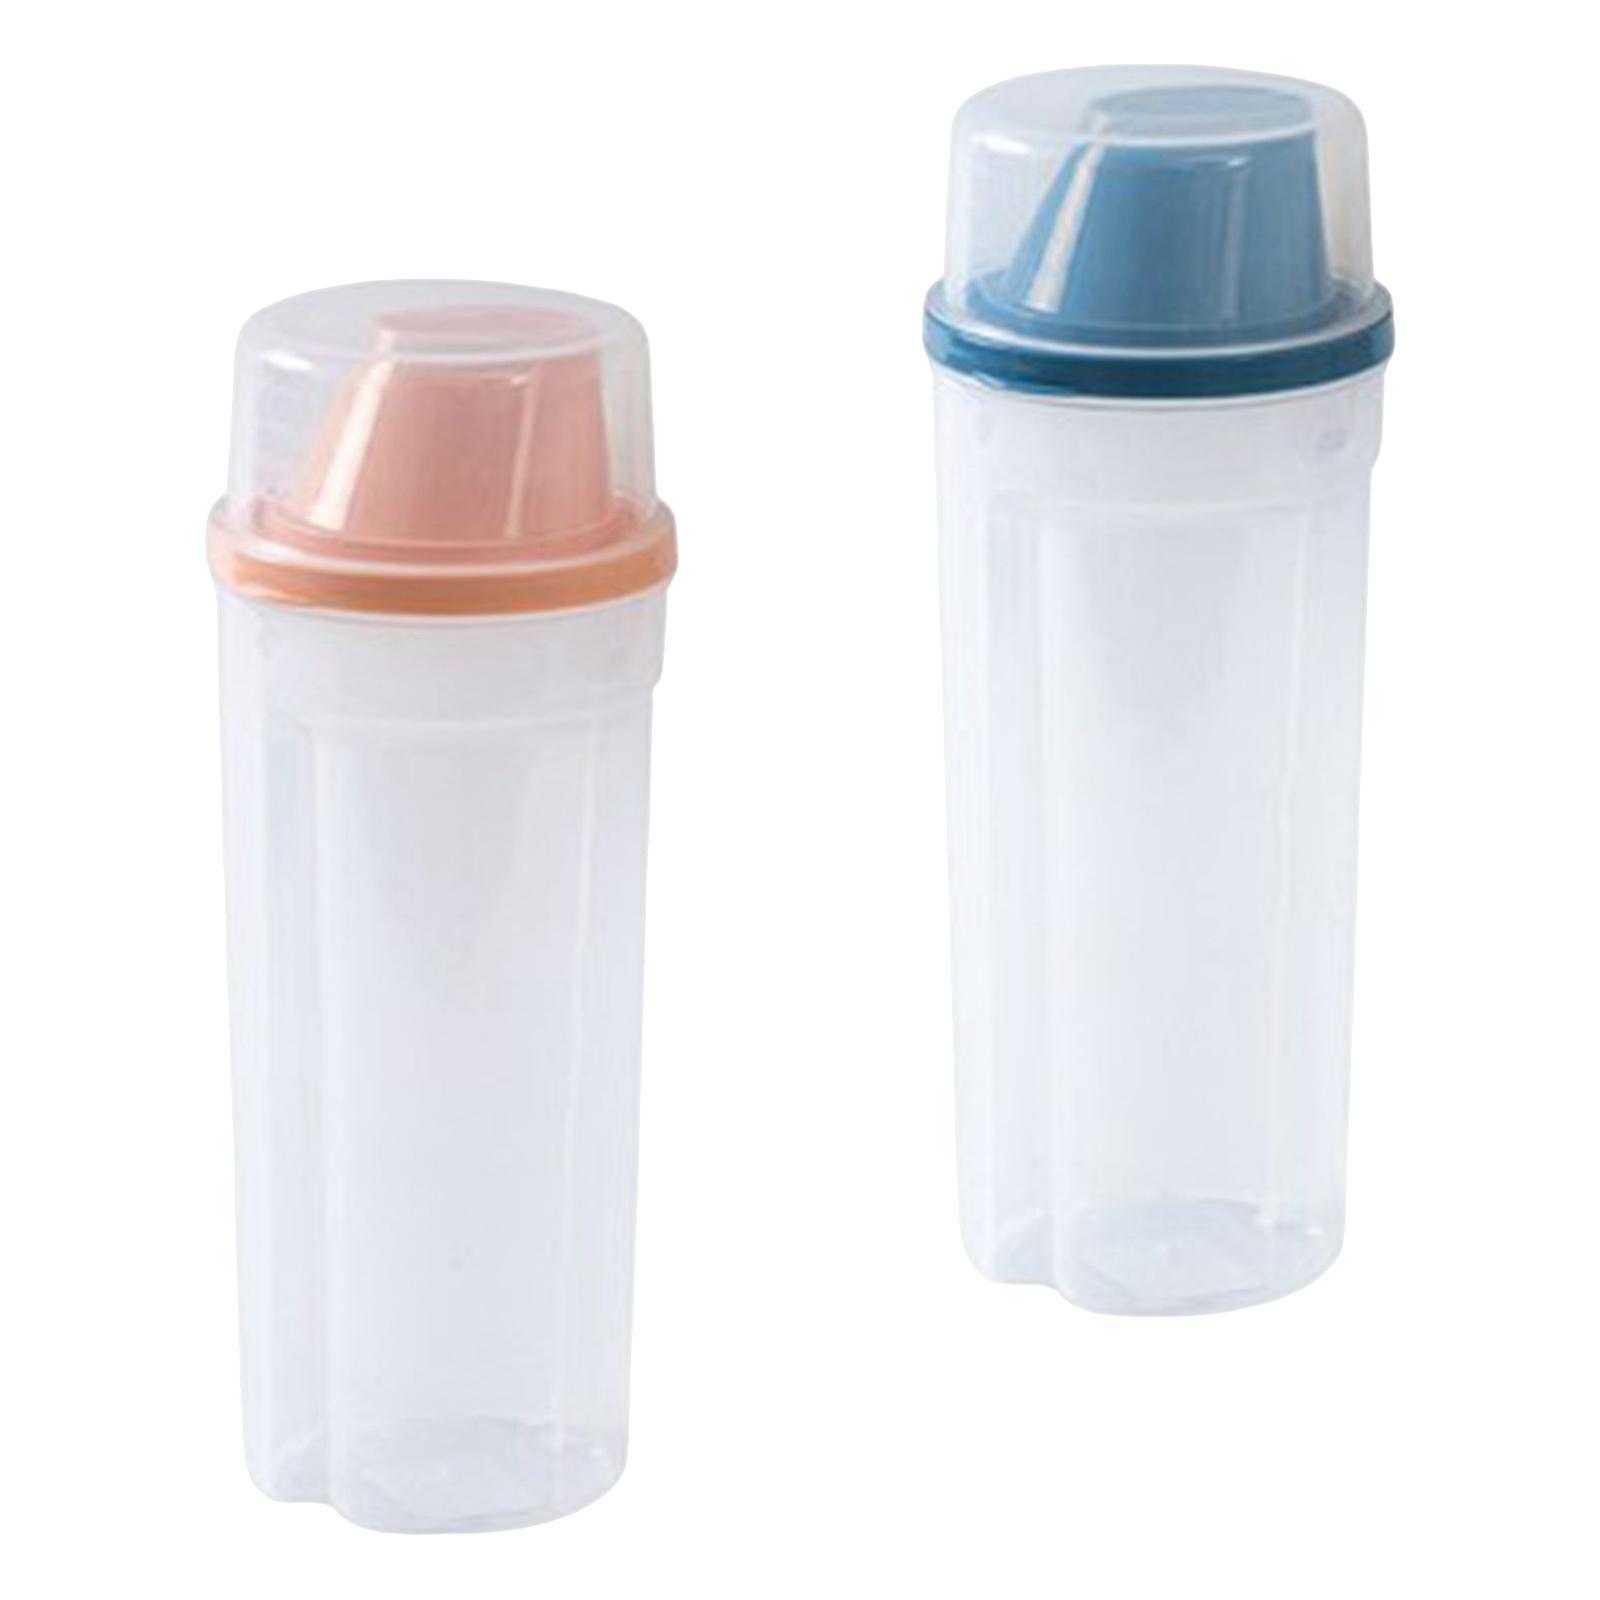 2x Sealed Cereal Container Food Dispenser Rice Storage Bin for Sugar Cereal